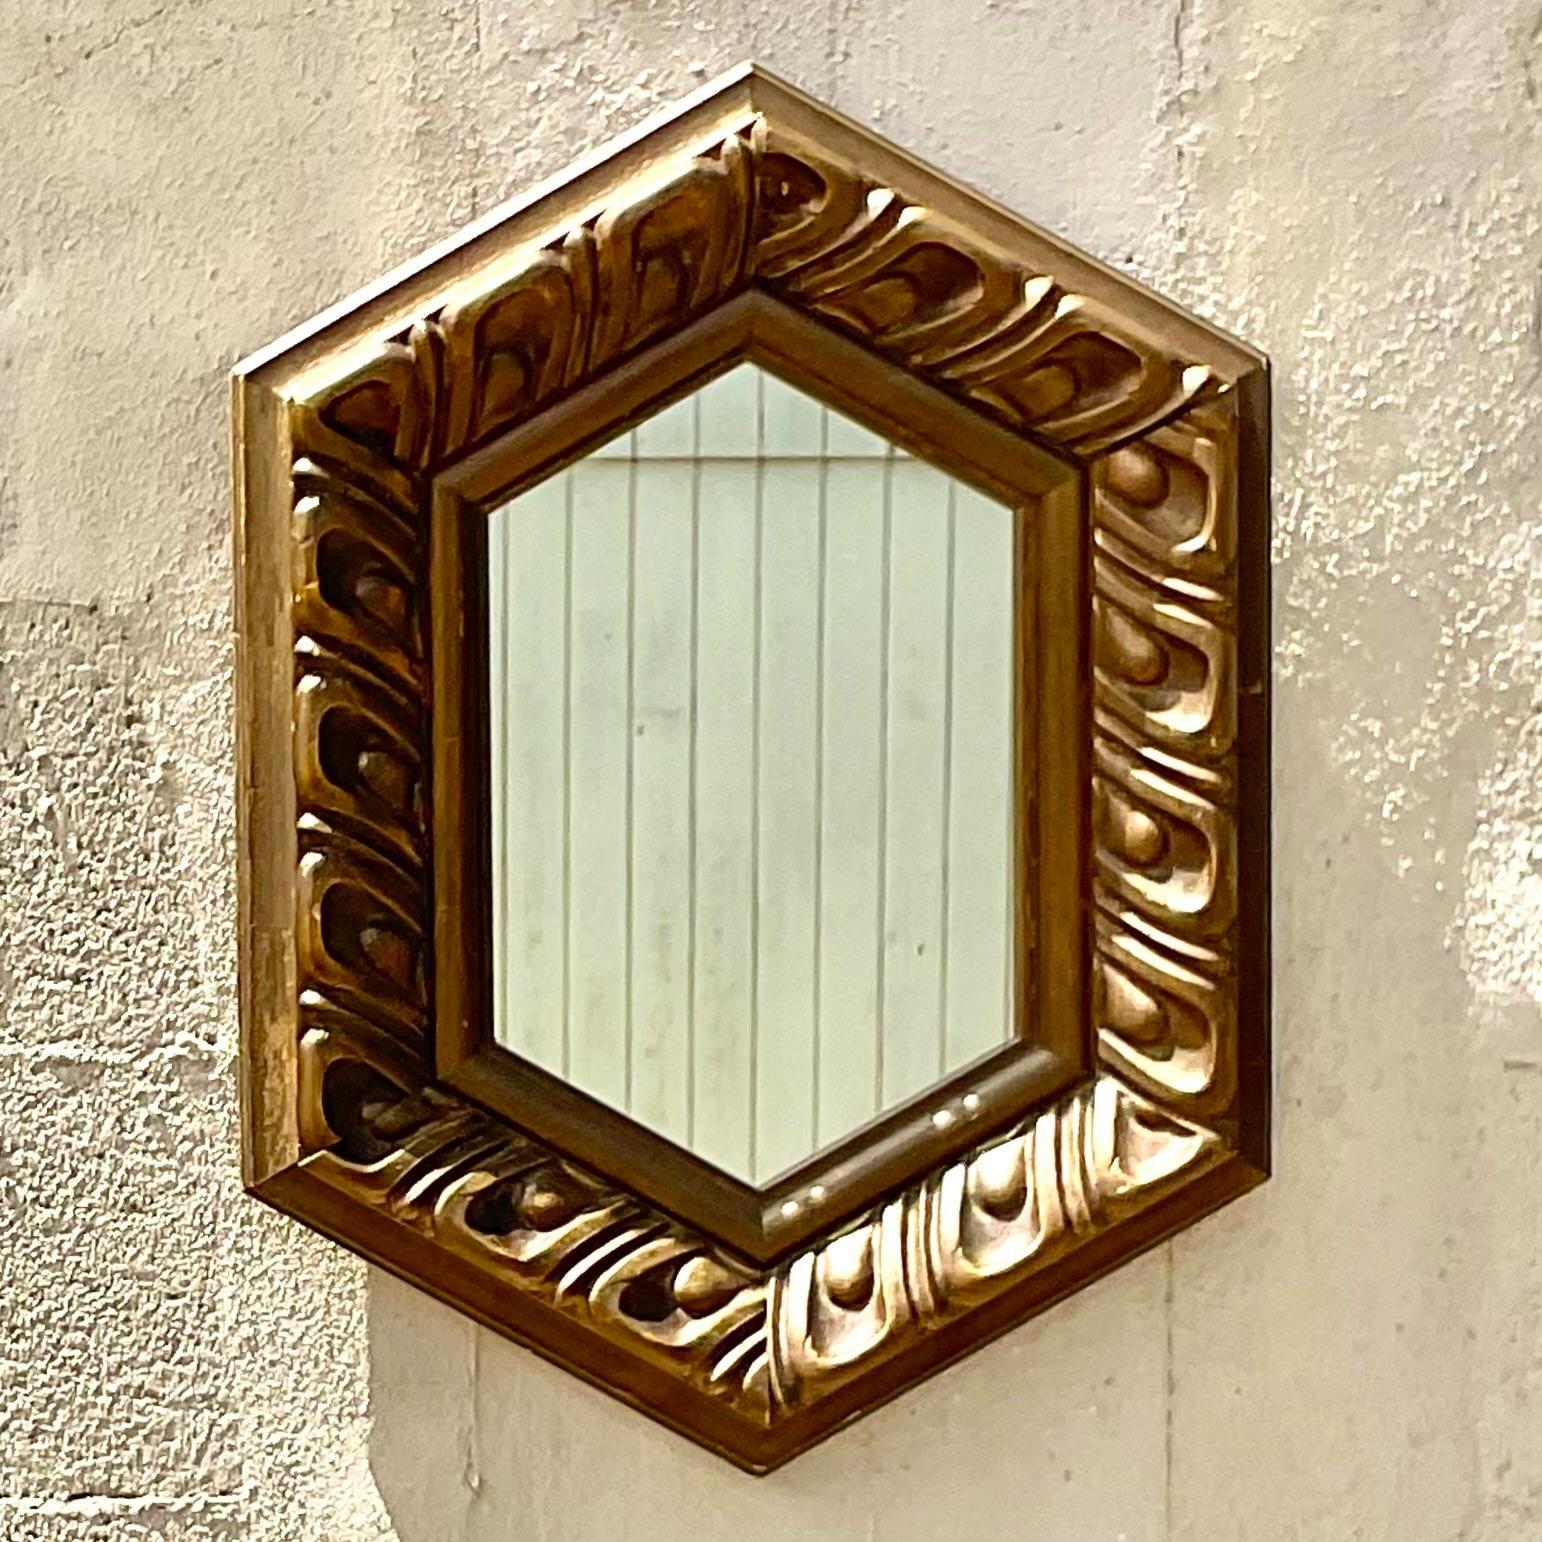 Fabulous vintage Regency mirror. Beautiful carved detail with a chic hexagon shape. Acquired from a Palm Beach estate.